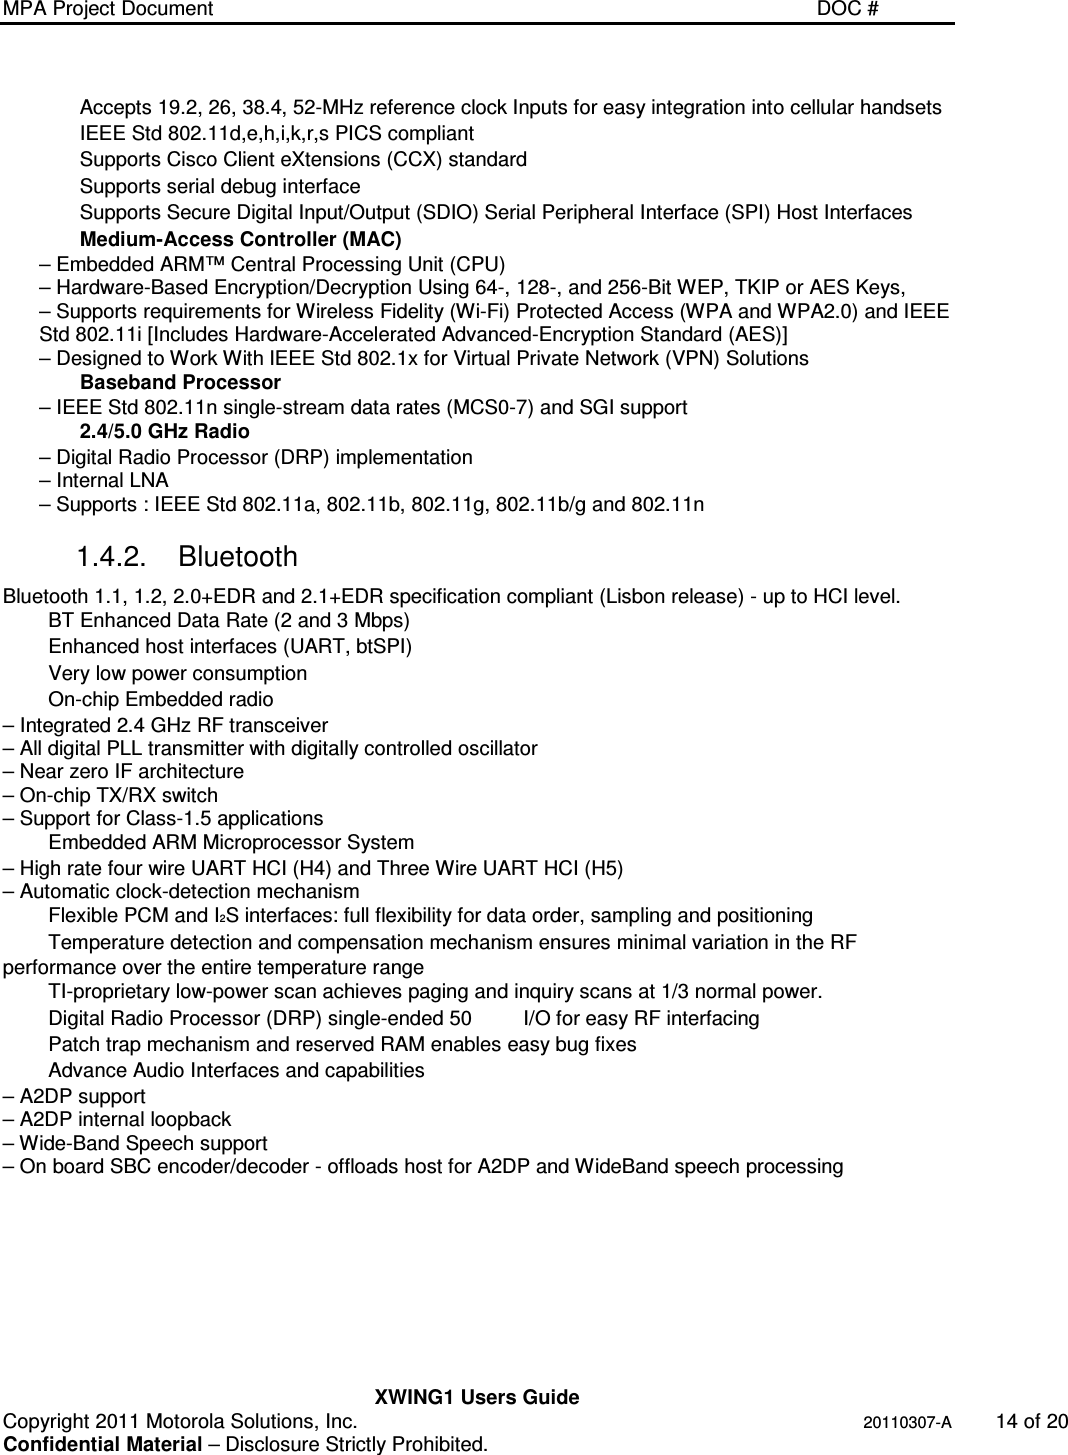 MPA Project Document   DOC #    XWING1 Users Guide Copyright 2011 Motorola Solutions, Inc.   20110307-A  14 of 20 Confidential Material – Disclosure Strictly Prohibited. Accepts 19.2, 26, 38.4, 52-MHz reference clock Inputs for easy integration into cellular handsets IEEE Std 802.11d,e,h,i,k,r,s PICS compliant Supports Cisco Client eXtensions (CCX) standard Supports serial debug interface Supports Secure Digital Input/Output (SDIO) Serial Peripheral Interface (SPI) Host Interfaces Medium-Access Controller (MAC) – Embedded ARM™ Central Processing Unit (CPU) – Hardware-Based Encryption/Decryption Using 64-, 128-, and 256-Bit WEP, TKIP or AES Keys, – Supports requirements for Wireless Fidelity (Wi-Fi) Protected Access (WPA and WPA2.0) and IEEE Std 802.11i [Includes Hardware-Accelerated Advanced-Encryption Standard (AES)] – Designed to Work With IEEE Std 802.1x for Virtual Private Network (VPN) Solutions Baseband Processor – IEEE Std 802.11n single-stream data rates (MCS0-7) and SGI support 2.4/5.0 GHz Radio – Digital Radio Processor (DRP) implementation – Internal LNA – Supports : IEEE Std 802.11a, 802.11b, 802.11g, 802.11b/g and 802.11n 1.4.2.  Bluetooth Bluetooth 1.1, 1.2, 2.0+EDR and 2.1+EDR specification compliant (Lisbon release) - up to HCI level. BT Enhanced Data Rate (2 and 3 Mbps) Enhanced host interfaces (UART, btSPI) Very low power consumption On-chip Embedded radio – Integrated 2.4 GHz RF transceiver – All digital PLL transmitter with digitally controlled oscillator – Near zero IF architecture – On-chip TX/RX switch – Support for Class-1.5 applications Embedded ARM Microprocessor System – High rate four wire UART HCI (H4) and Three Wire UART HCI (H5) – Automatic clock-detection mechanism Flexible PCM and I2S interfaces: full flexibility for data order, sampling and positioning Temperature detection and compensation mechanism ensures minimal variation in the RF performance over the entire temperature range TI-proprietary low-power scan achieves paging and inquiry scans at 1/3 normal power. Digital Radio Processor (DRP) single-ended 50  I/O for easy RF interfacing Patch trap mechanism and reserved RAM enables easy bug fixes Advance Audio Interfaces and capabilities – A2DP support – A2DP internal loopback – Wide-Band Speech support – On board SBC encoder/decoder - offloads host for A2DP and WideBand speech processing 